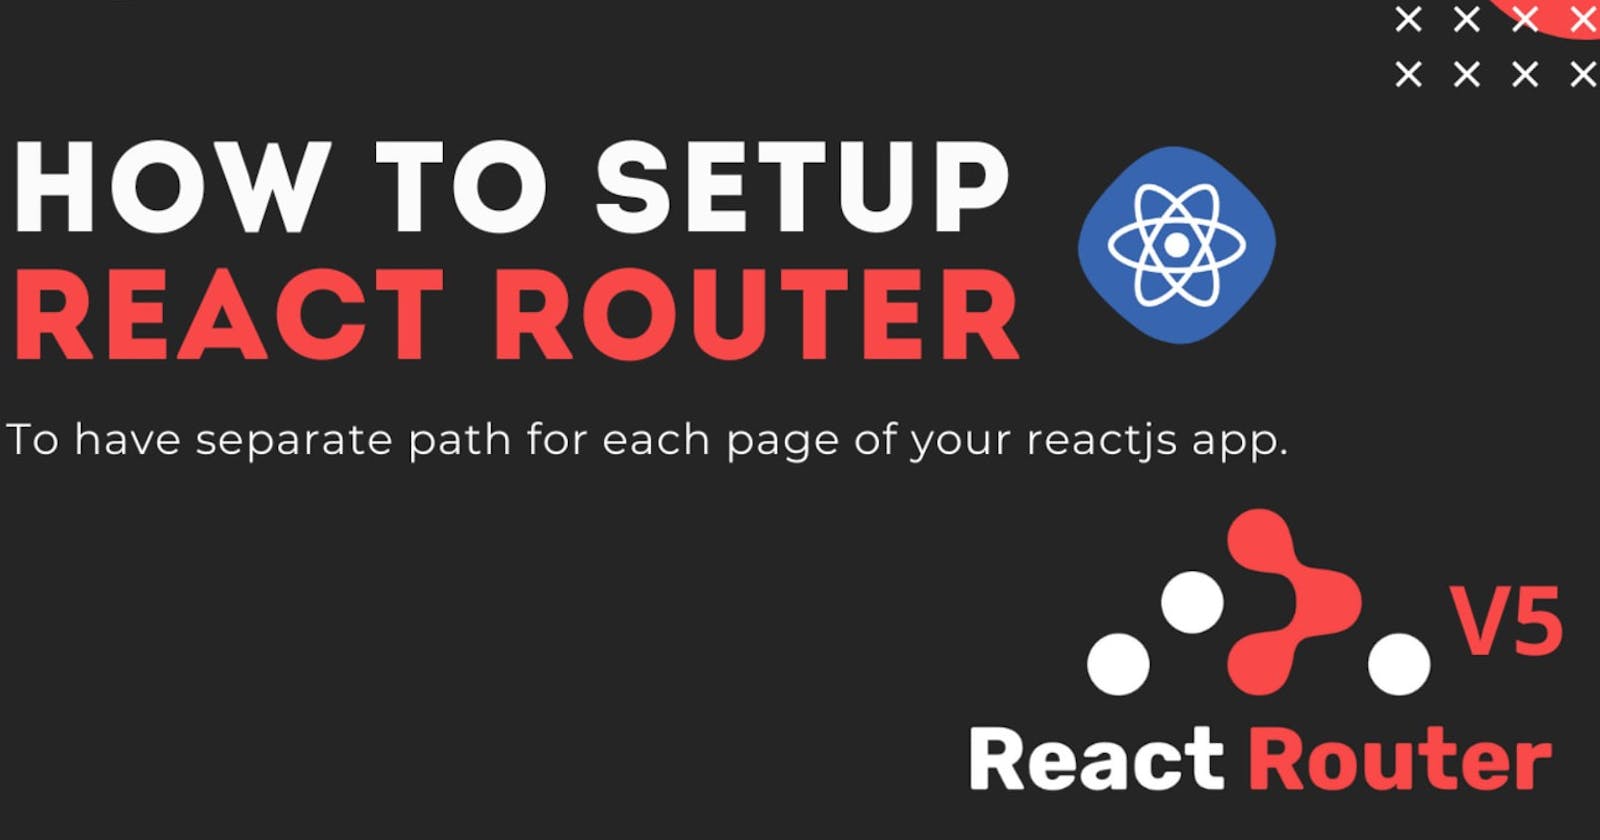 Leveling up with React: React Router